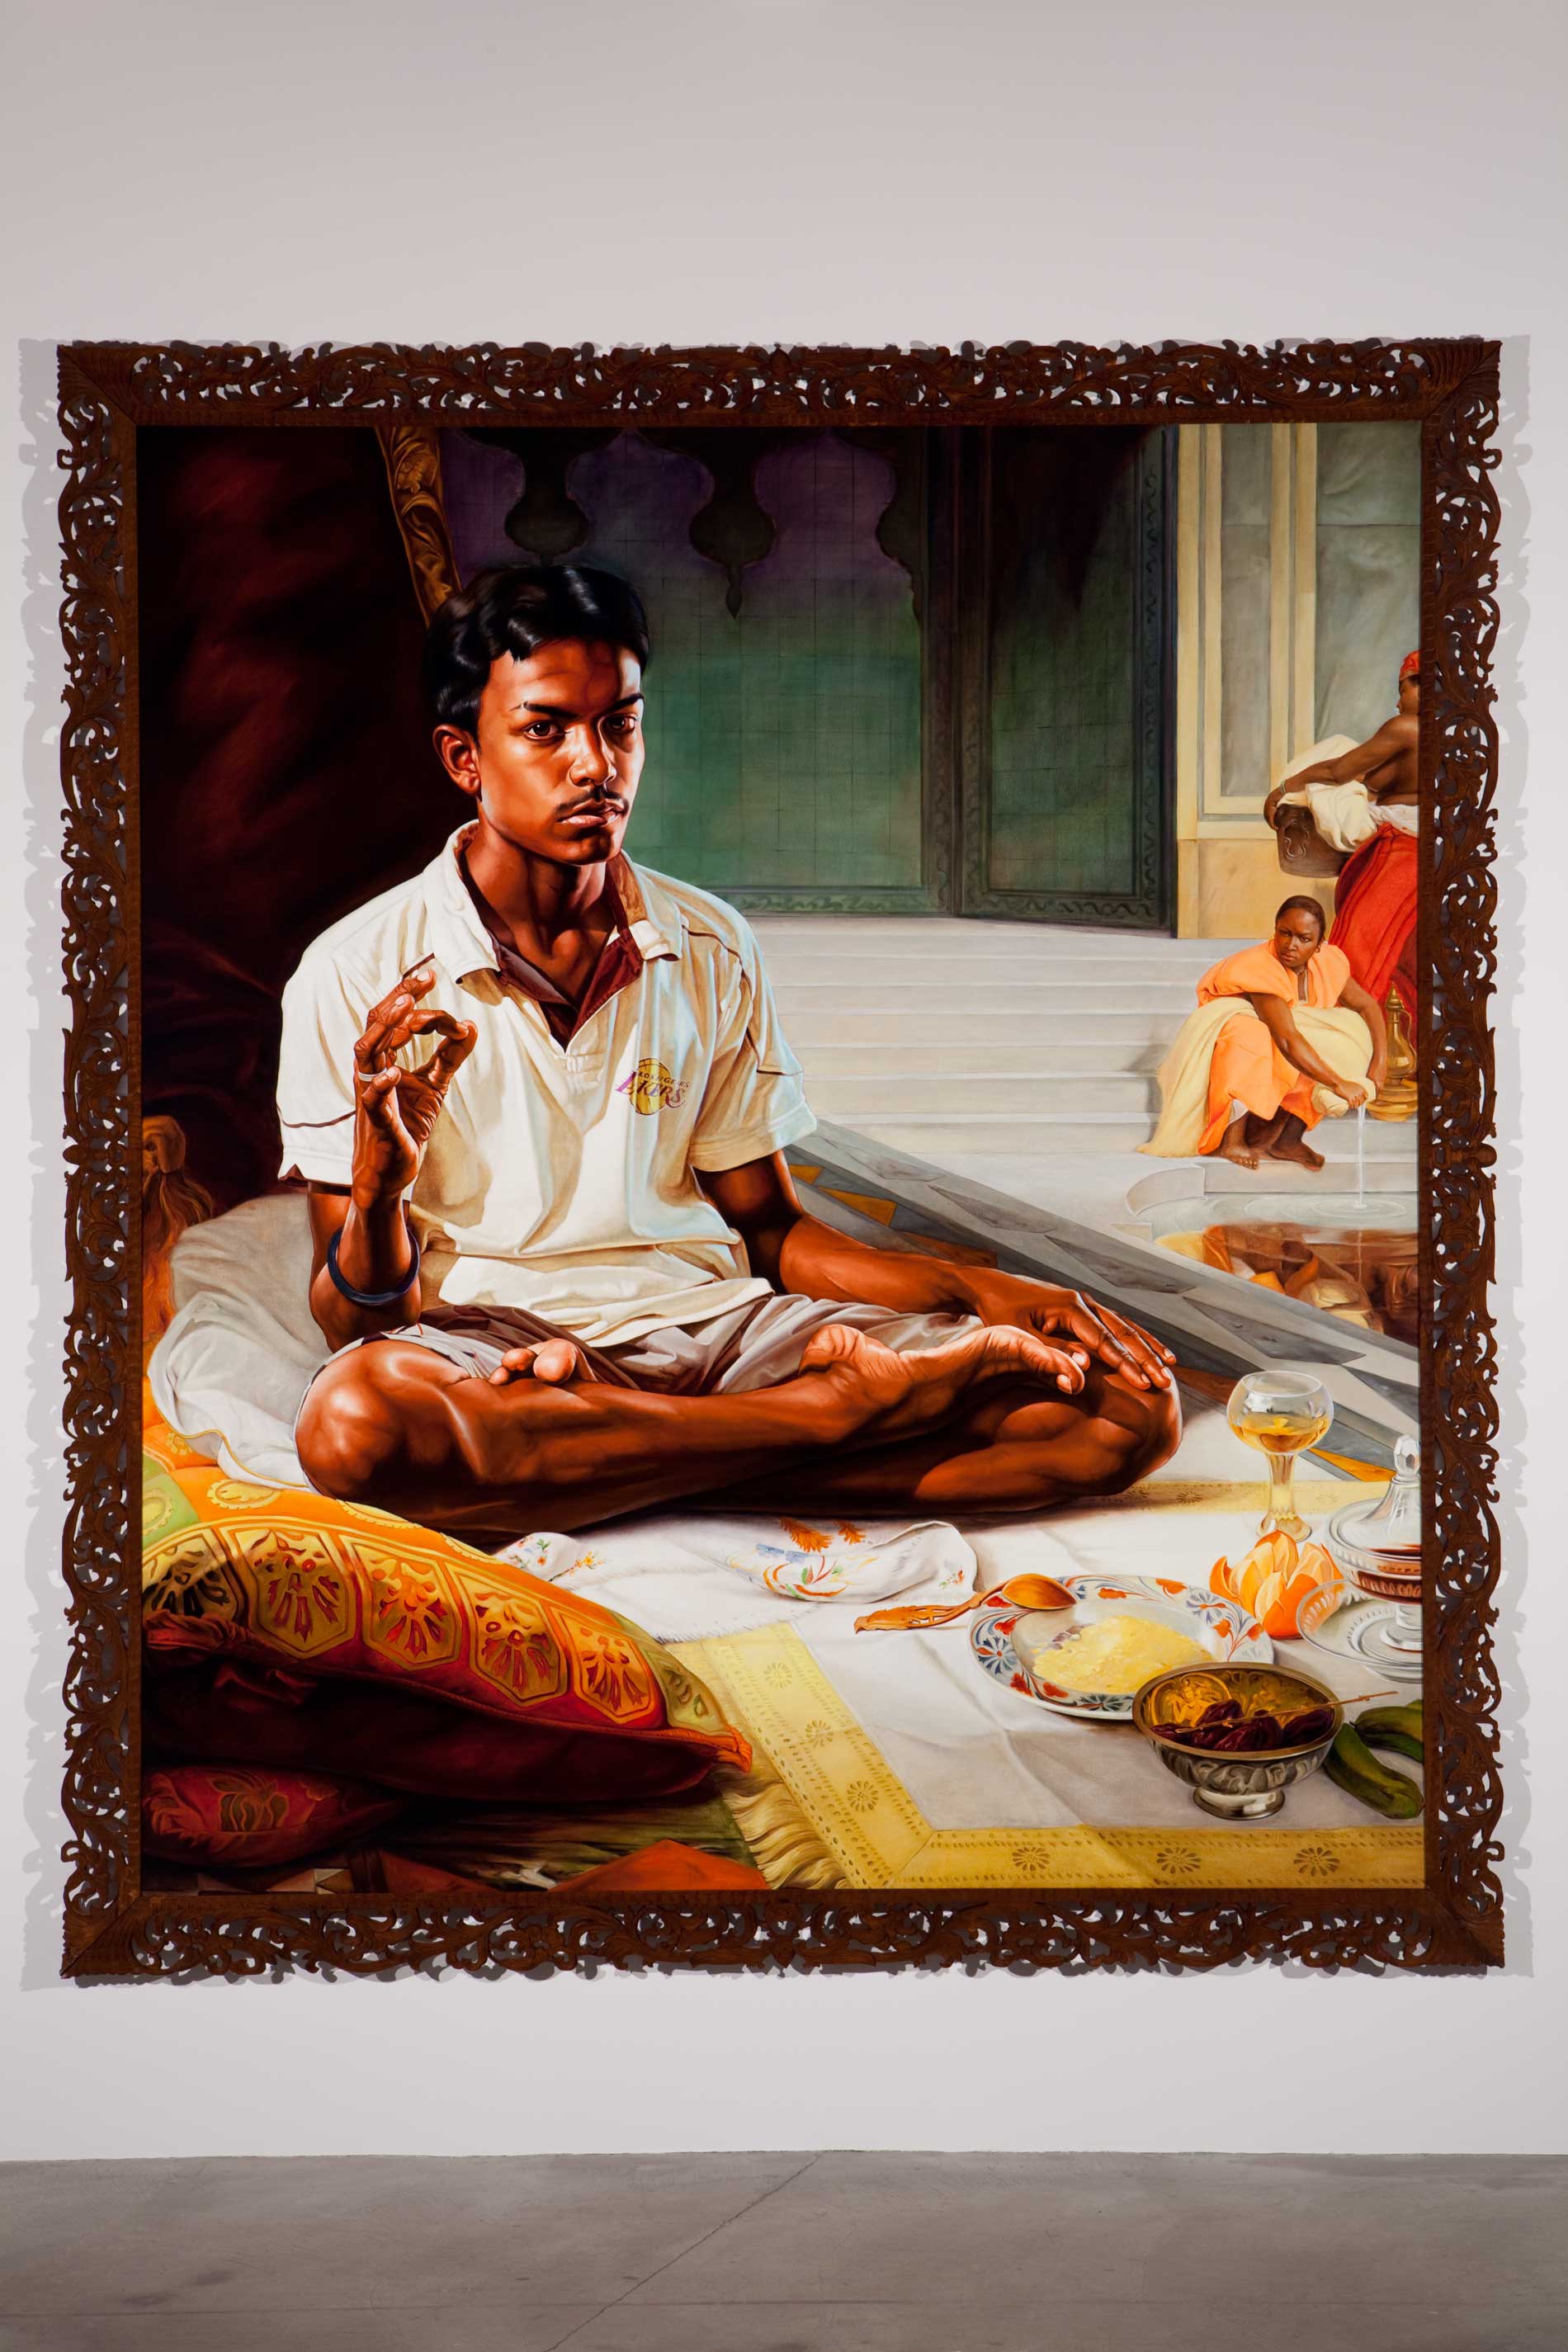 Kehinde Wiley | The World Stage: Sri Lanka | The White Slave, 2010 Oil on Canvas.  | 2